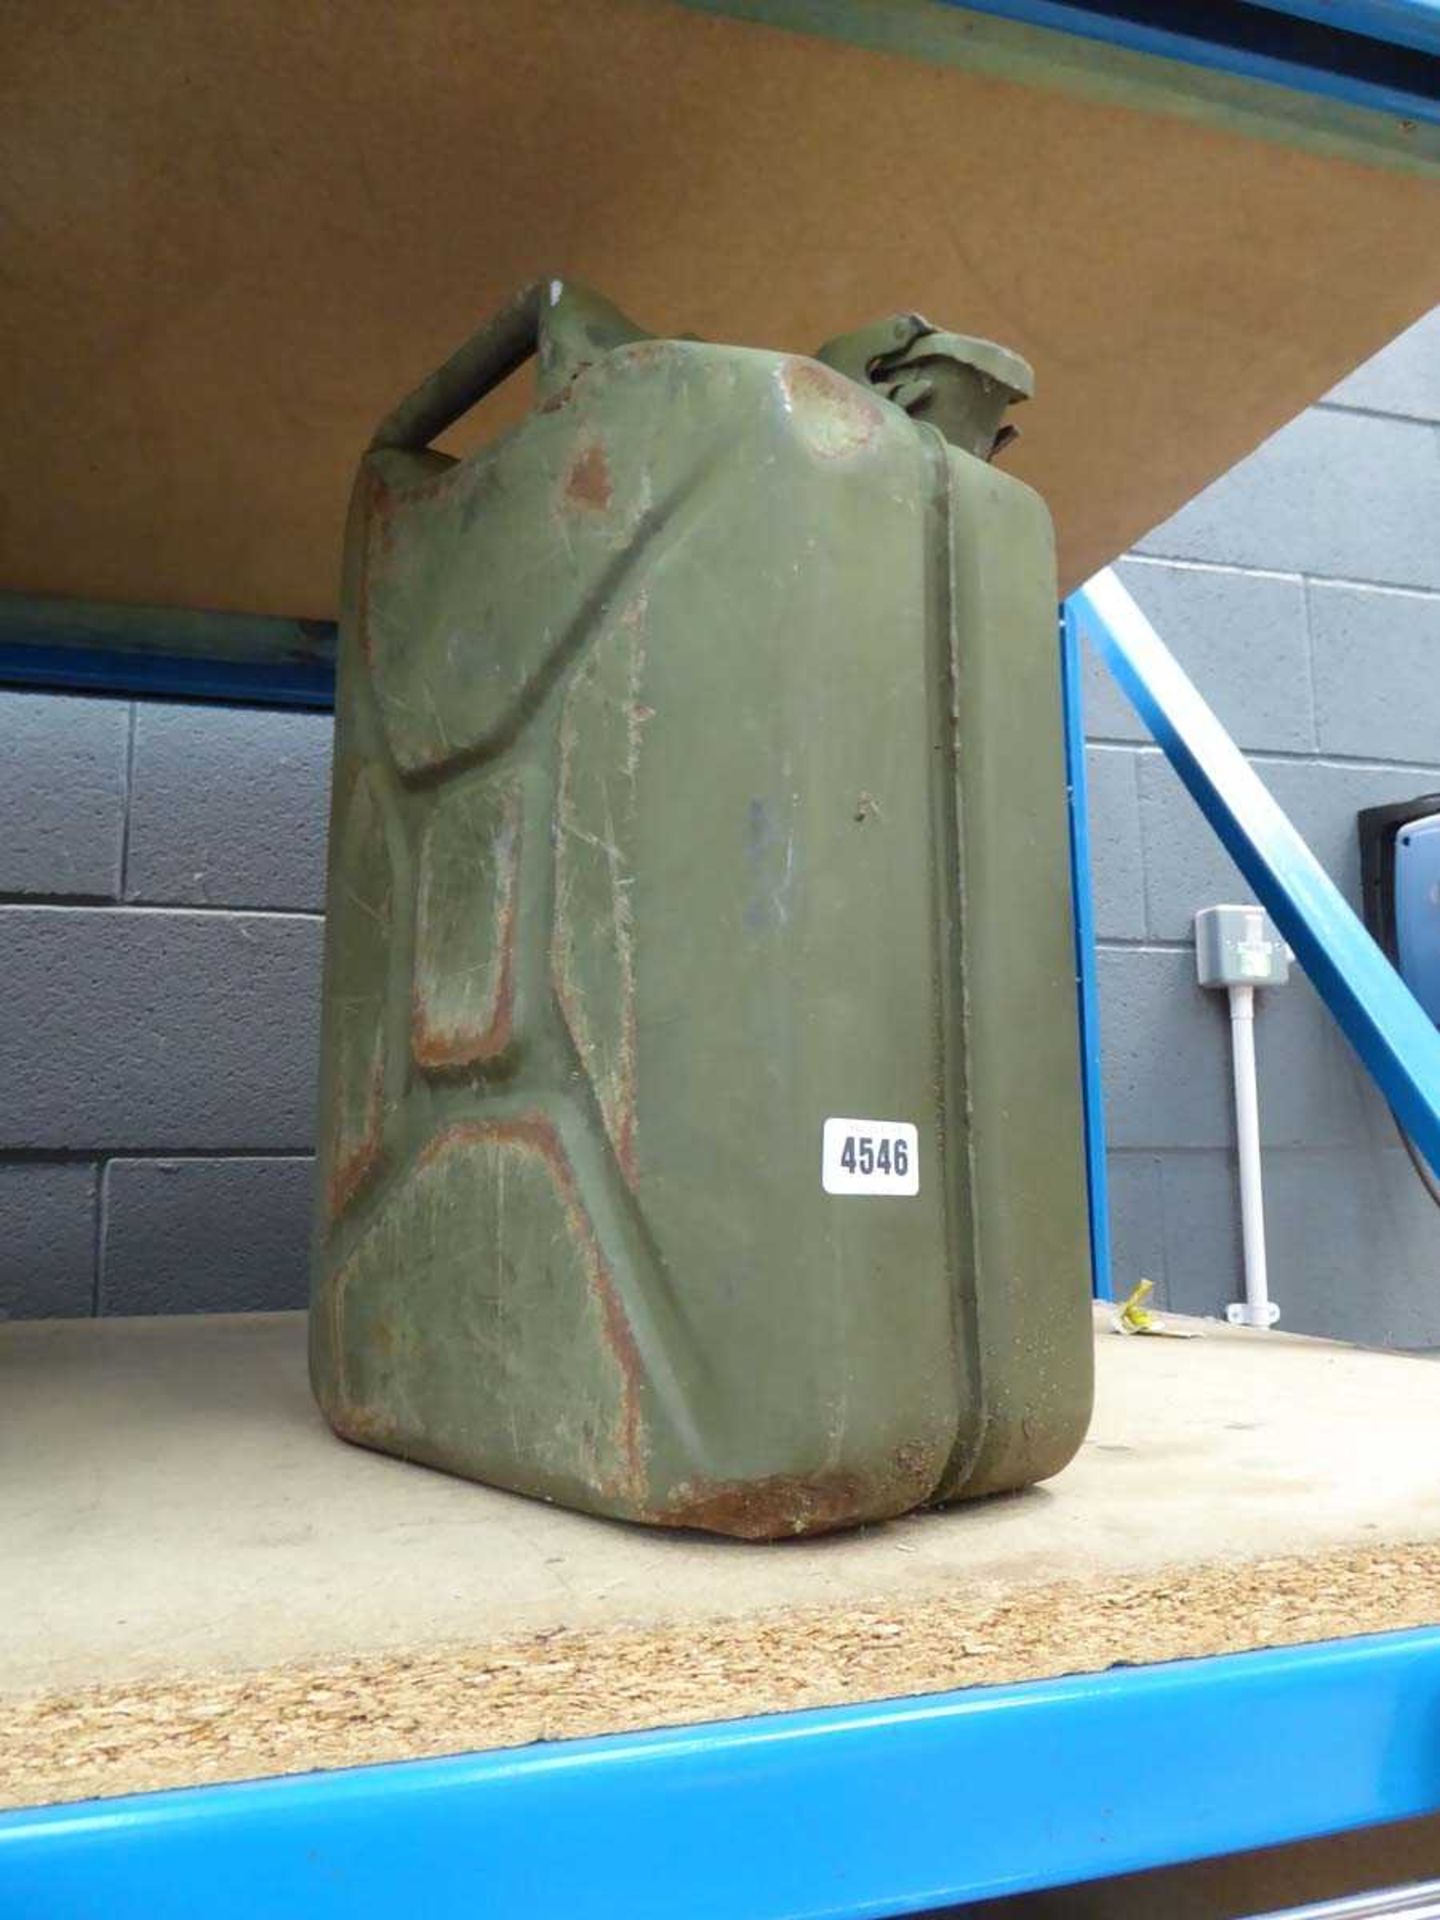 Green metal jerry can